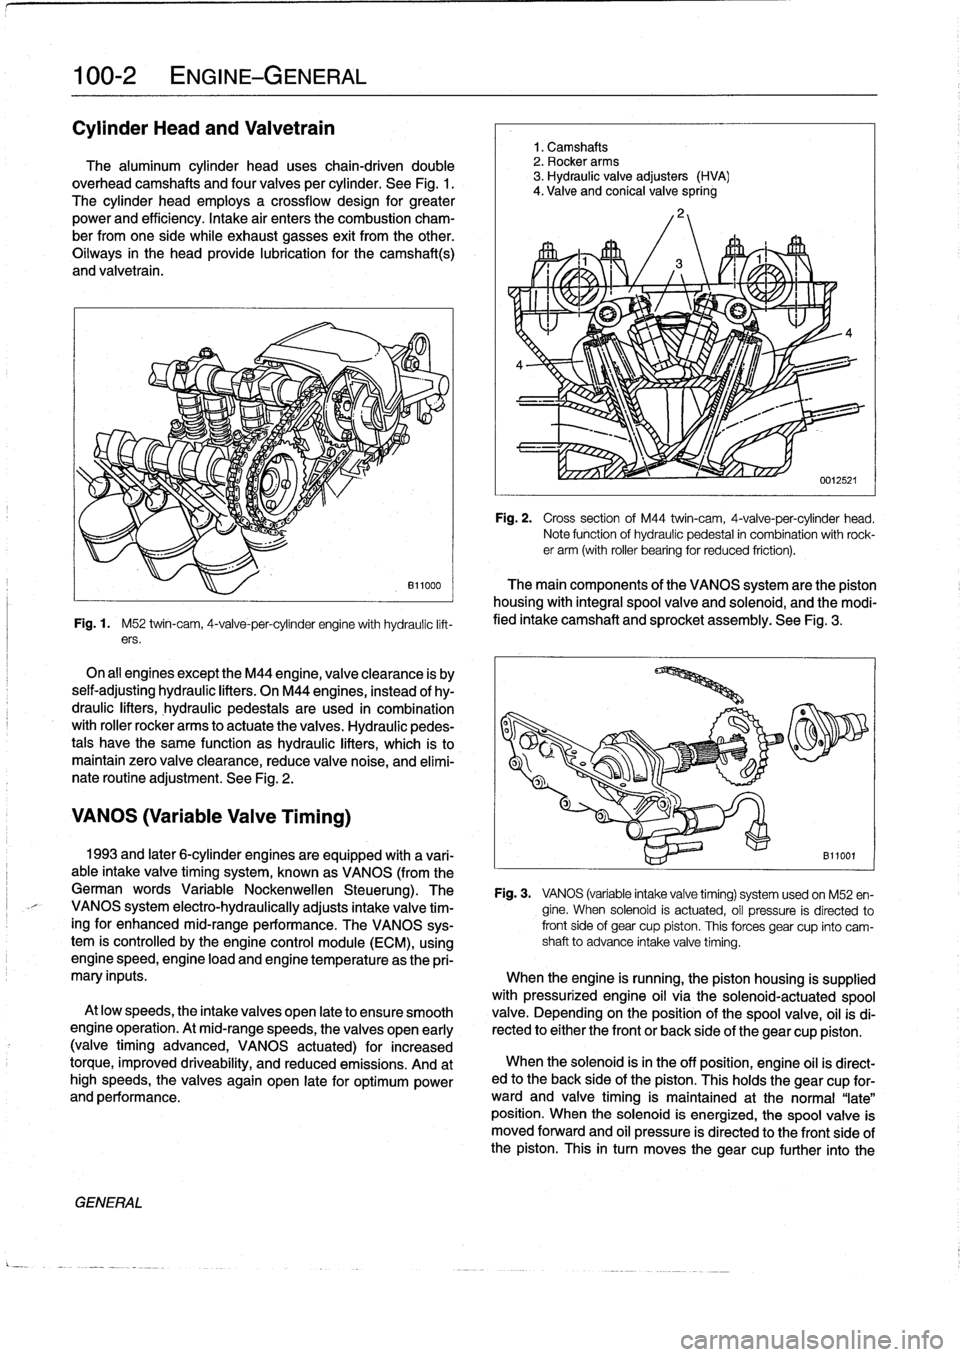 BMW 318i 1998 E36 Workshop Manual 
100-2
ENGINE-GENERAL

Cylinder
Head
and
Valvetrain

The
aluminum
cylinder
head
uses
chain-driven
double
overhead
camshafts
and
four
valves
per
cylinder
.
See
Fig
.
1
.

The
cylinder
head
employs
a
cr